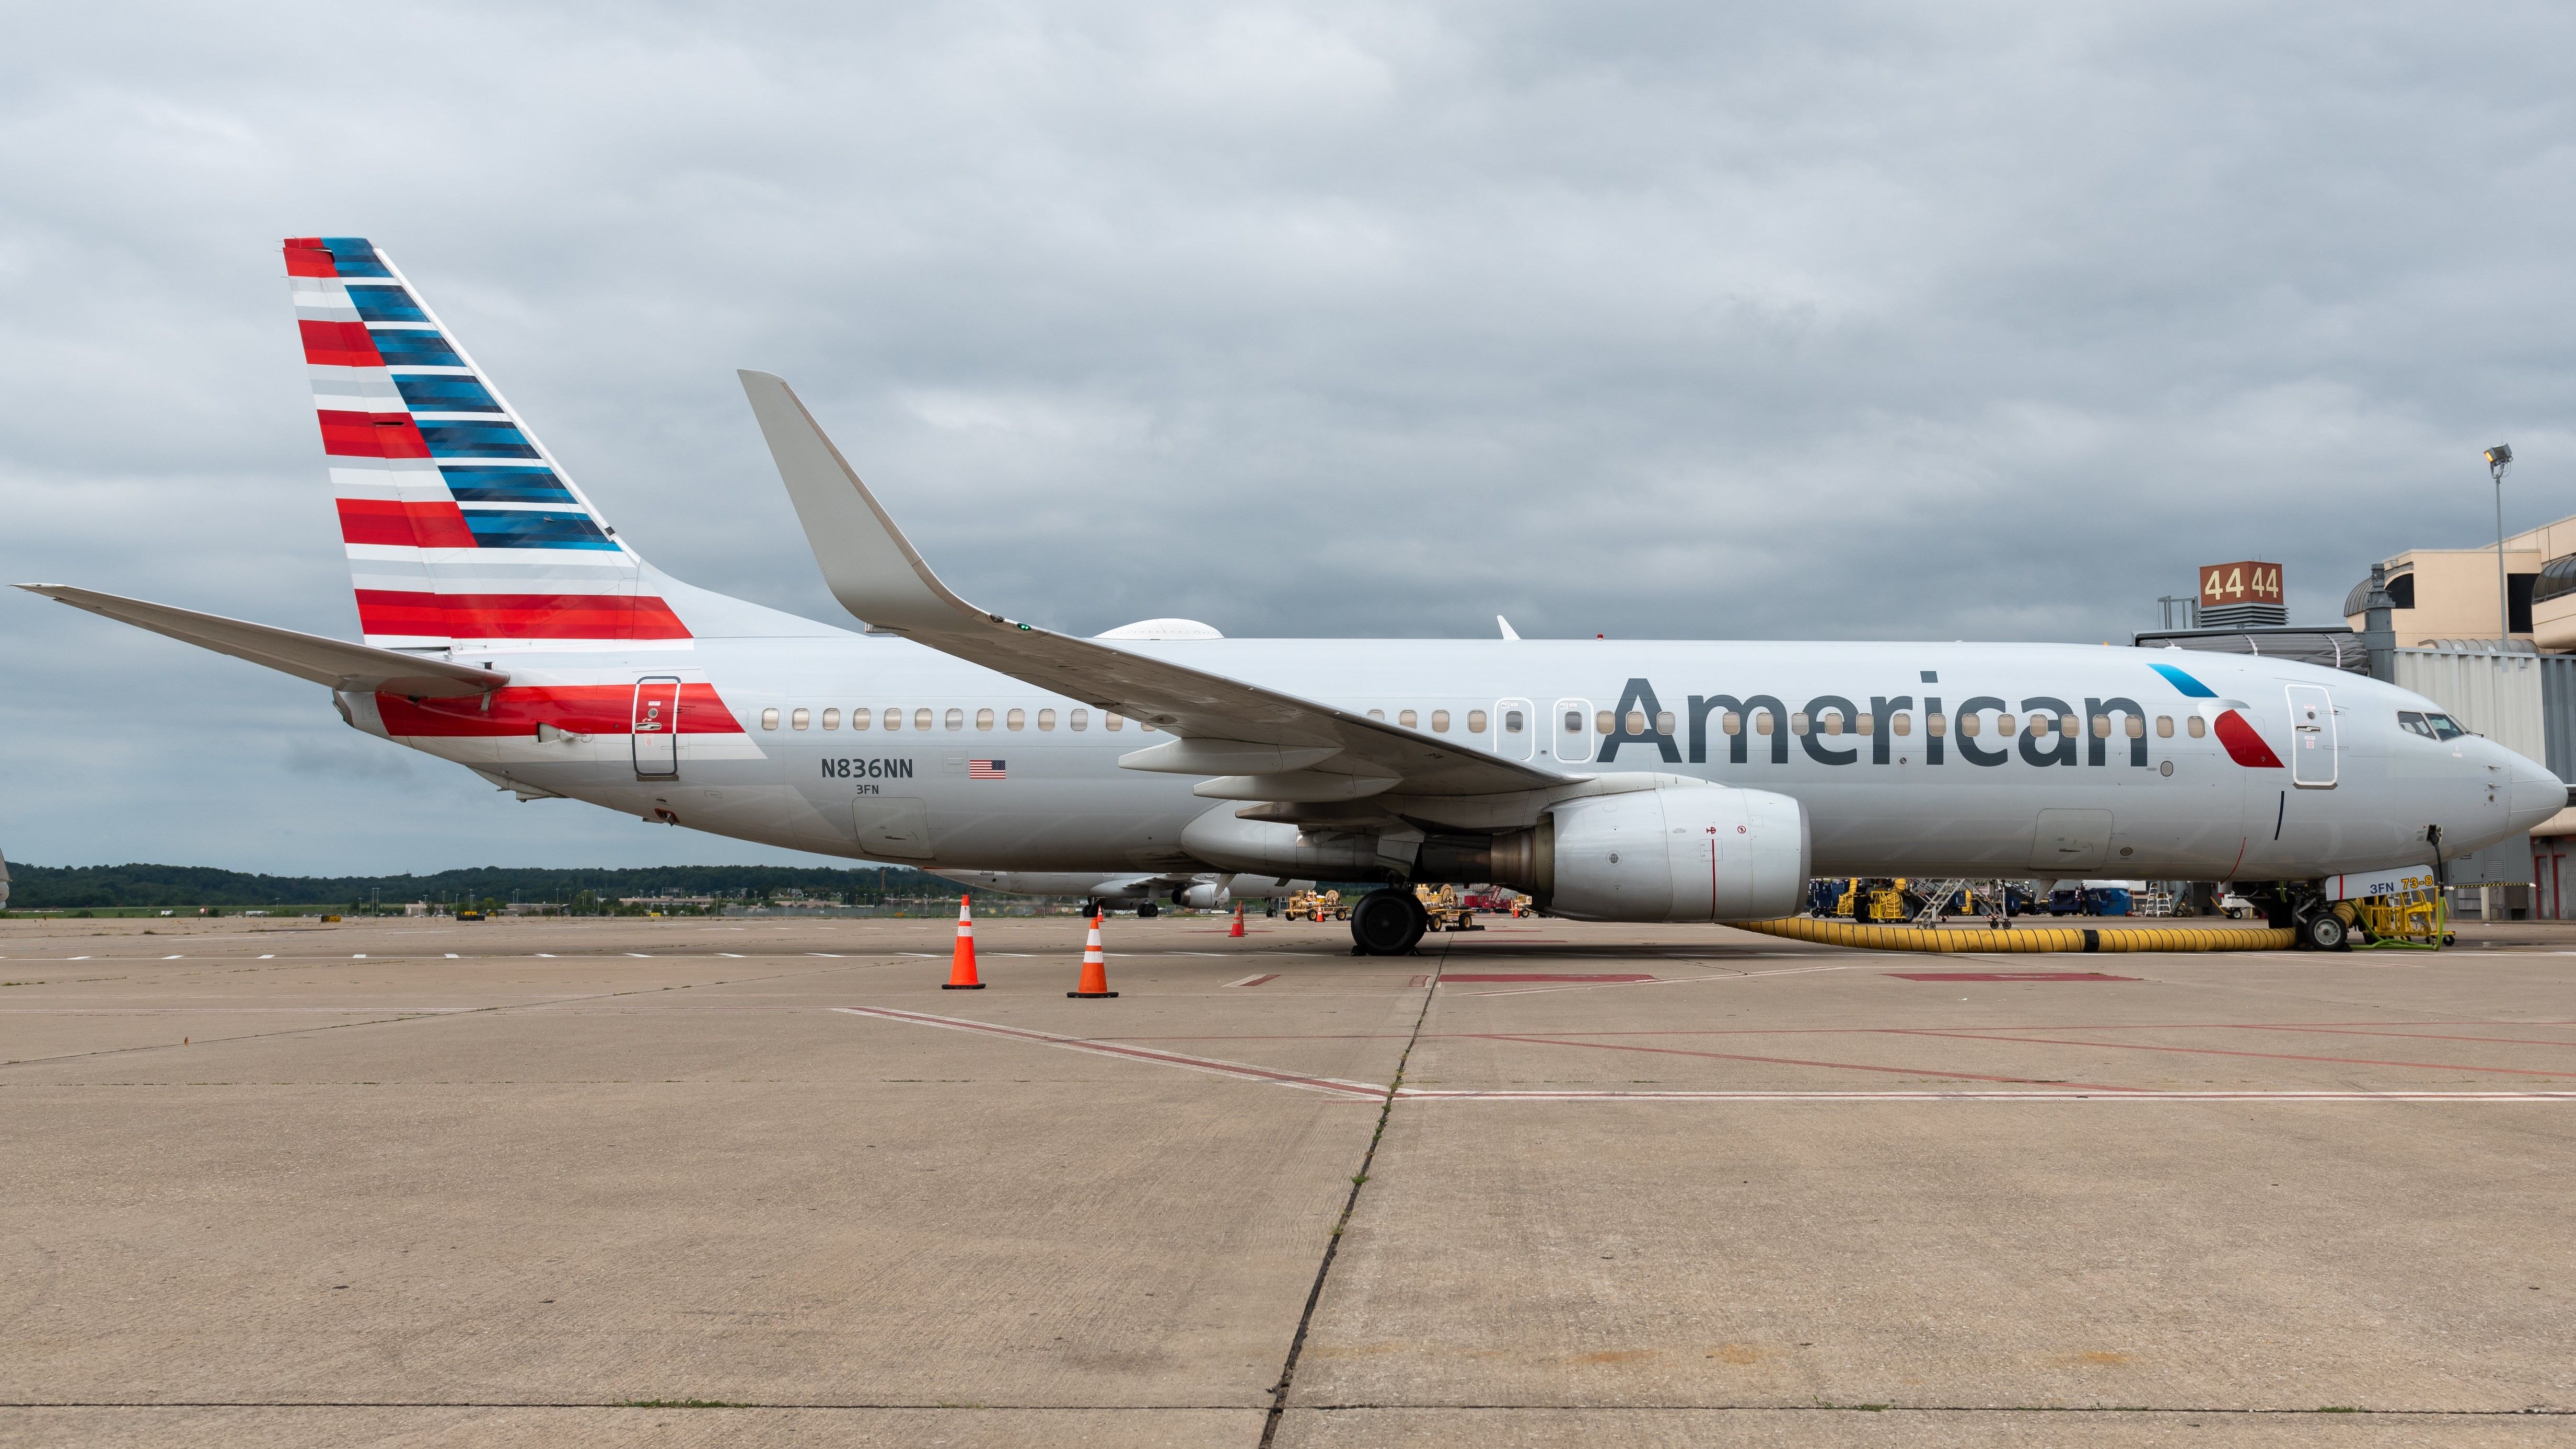 N836NN - an American Airlines Boeing 737-800 at a PIT Gate under overcast - 16--9